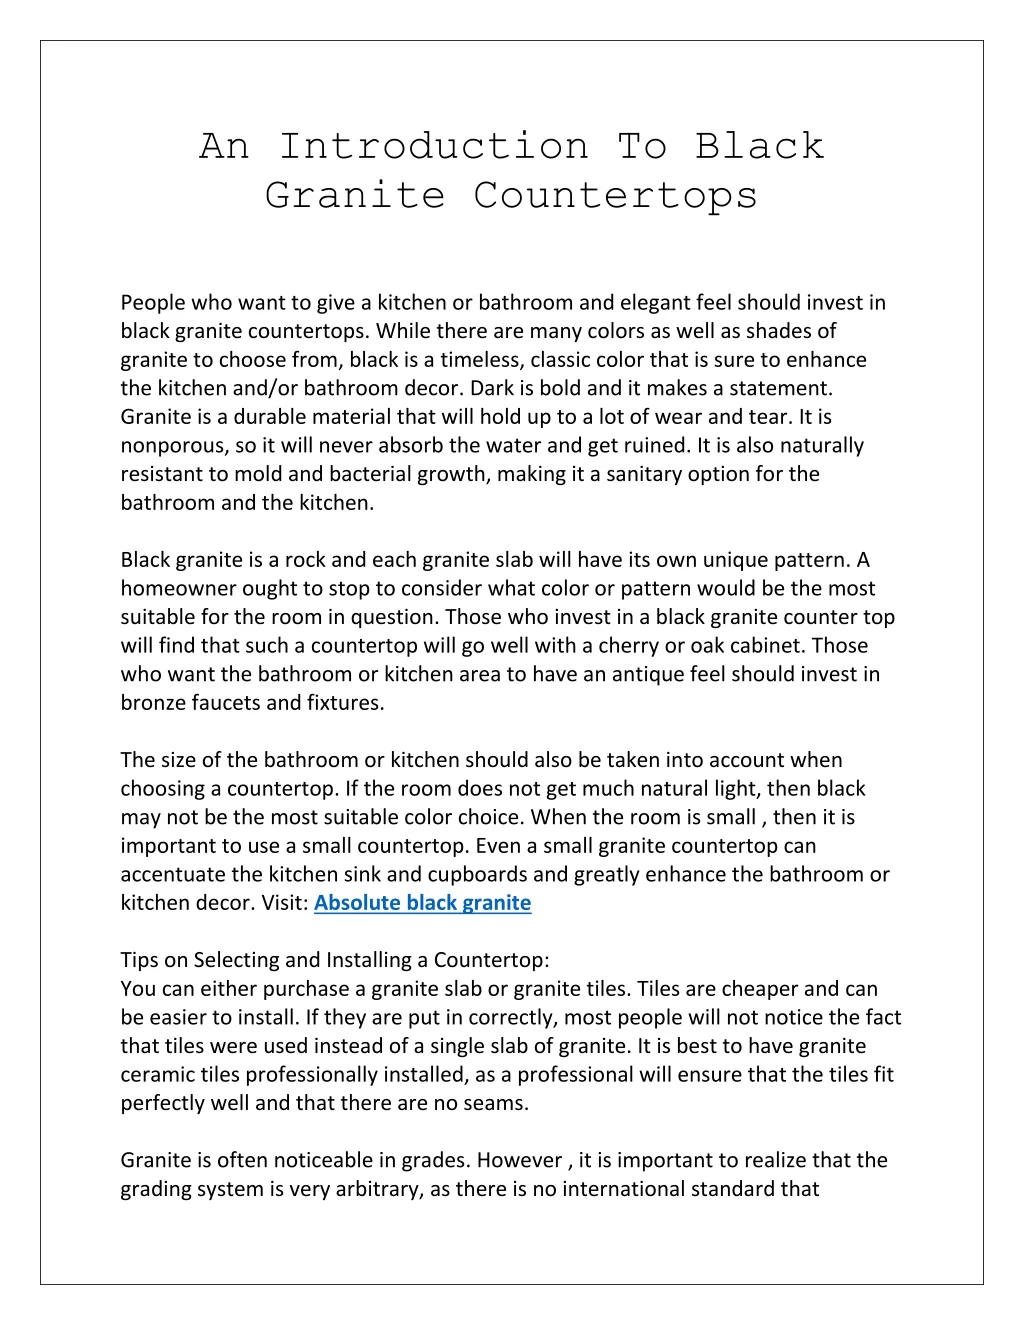 an introduction to black granite countertops